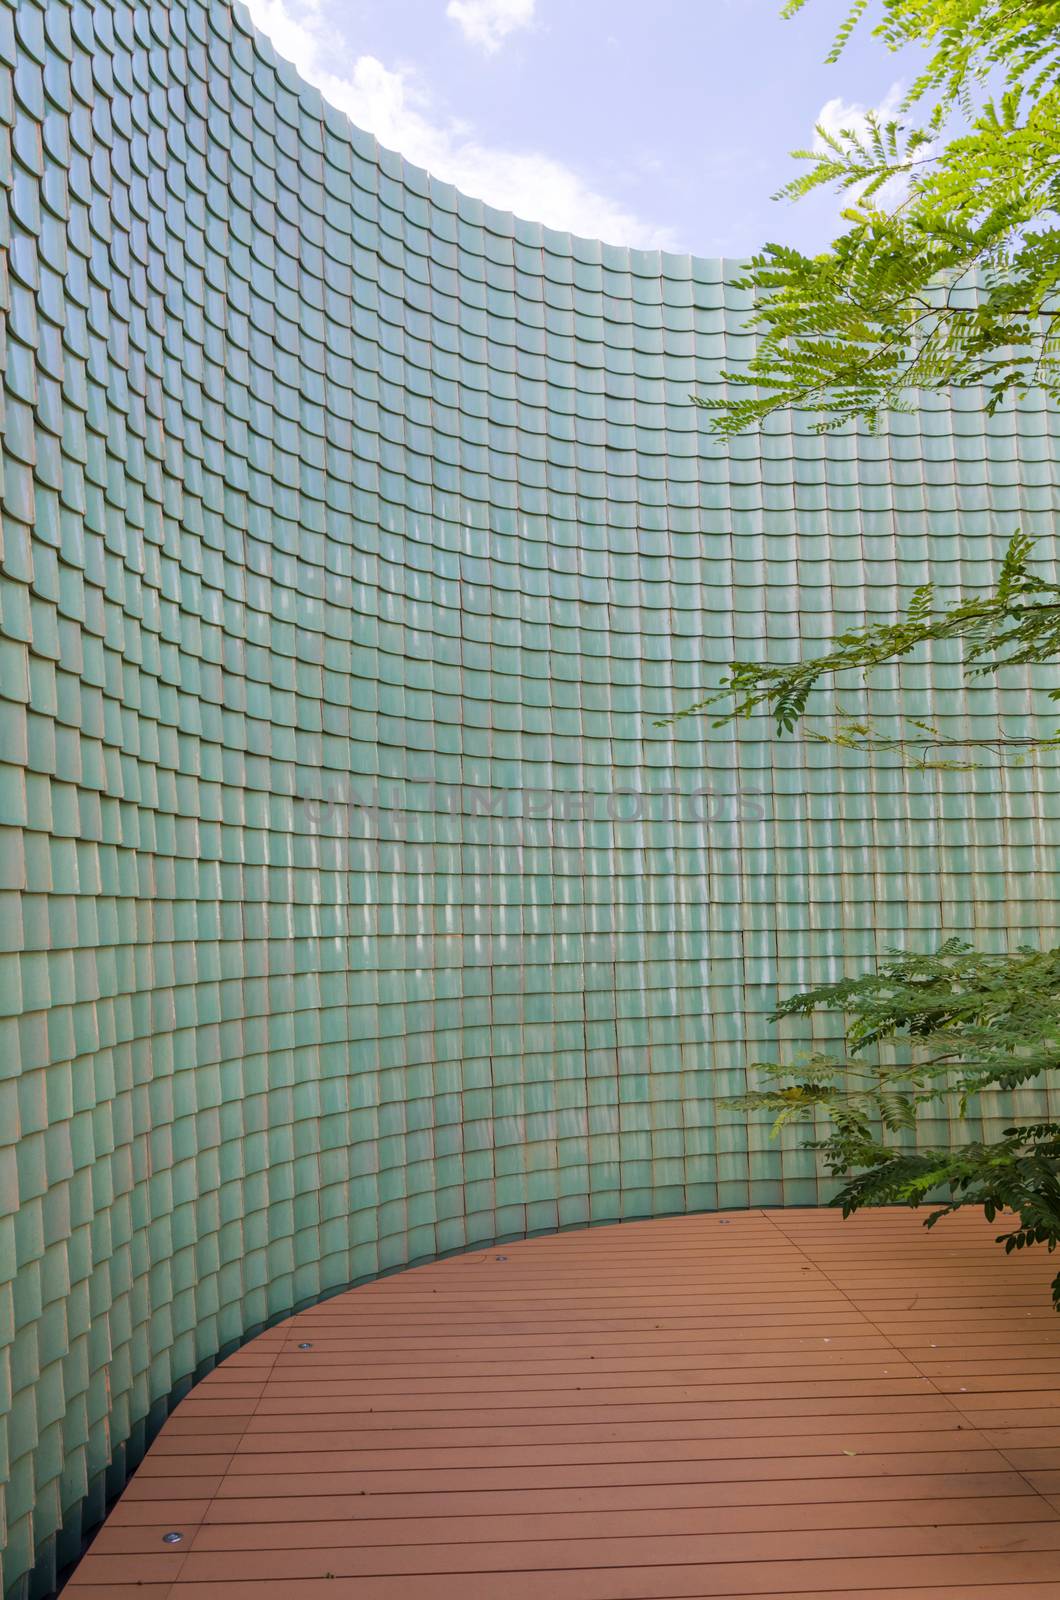 Traditional chinese green glazed tile wall in the garden